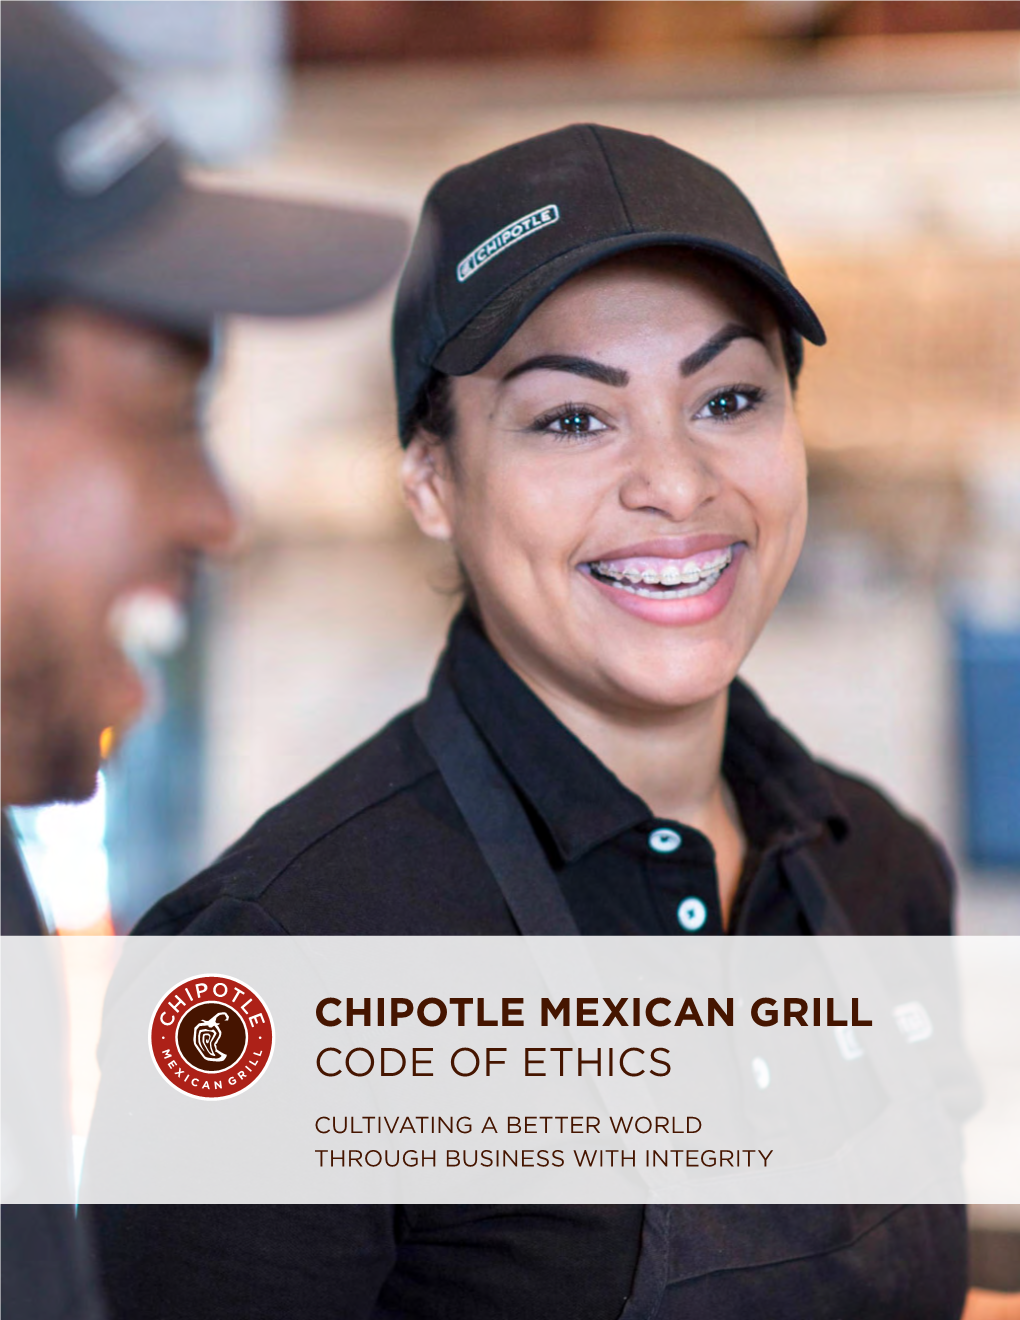 Chipotle Mexican Grill Code of Ethics